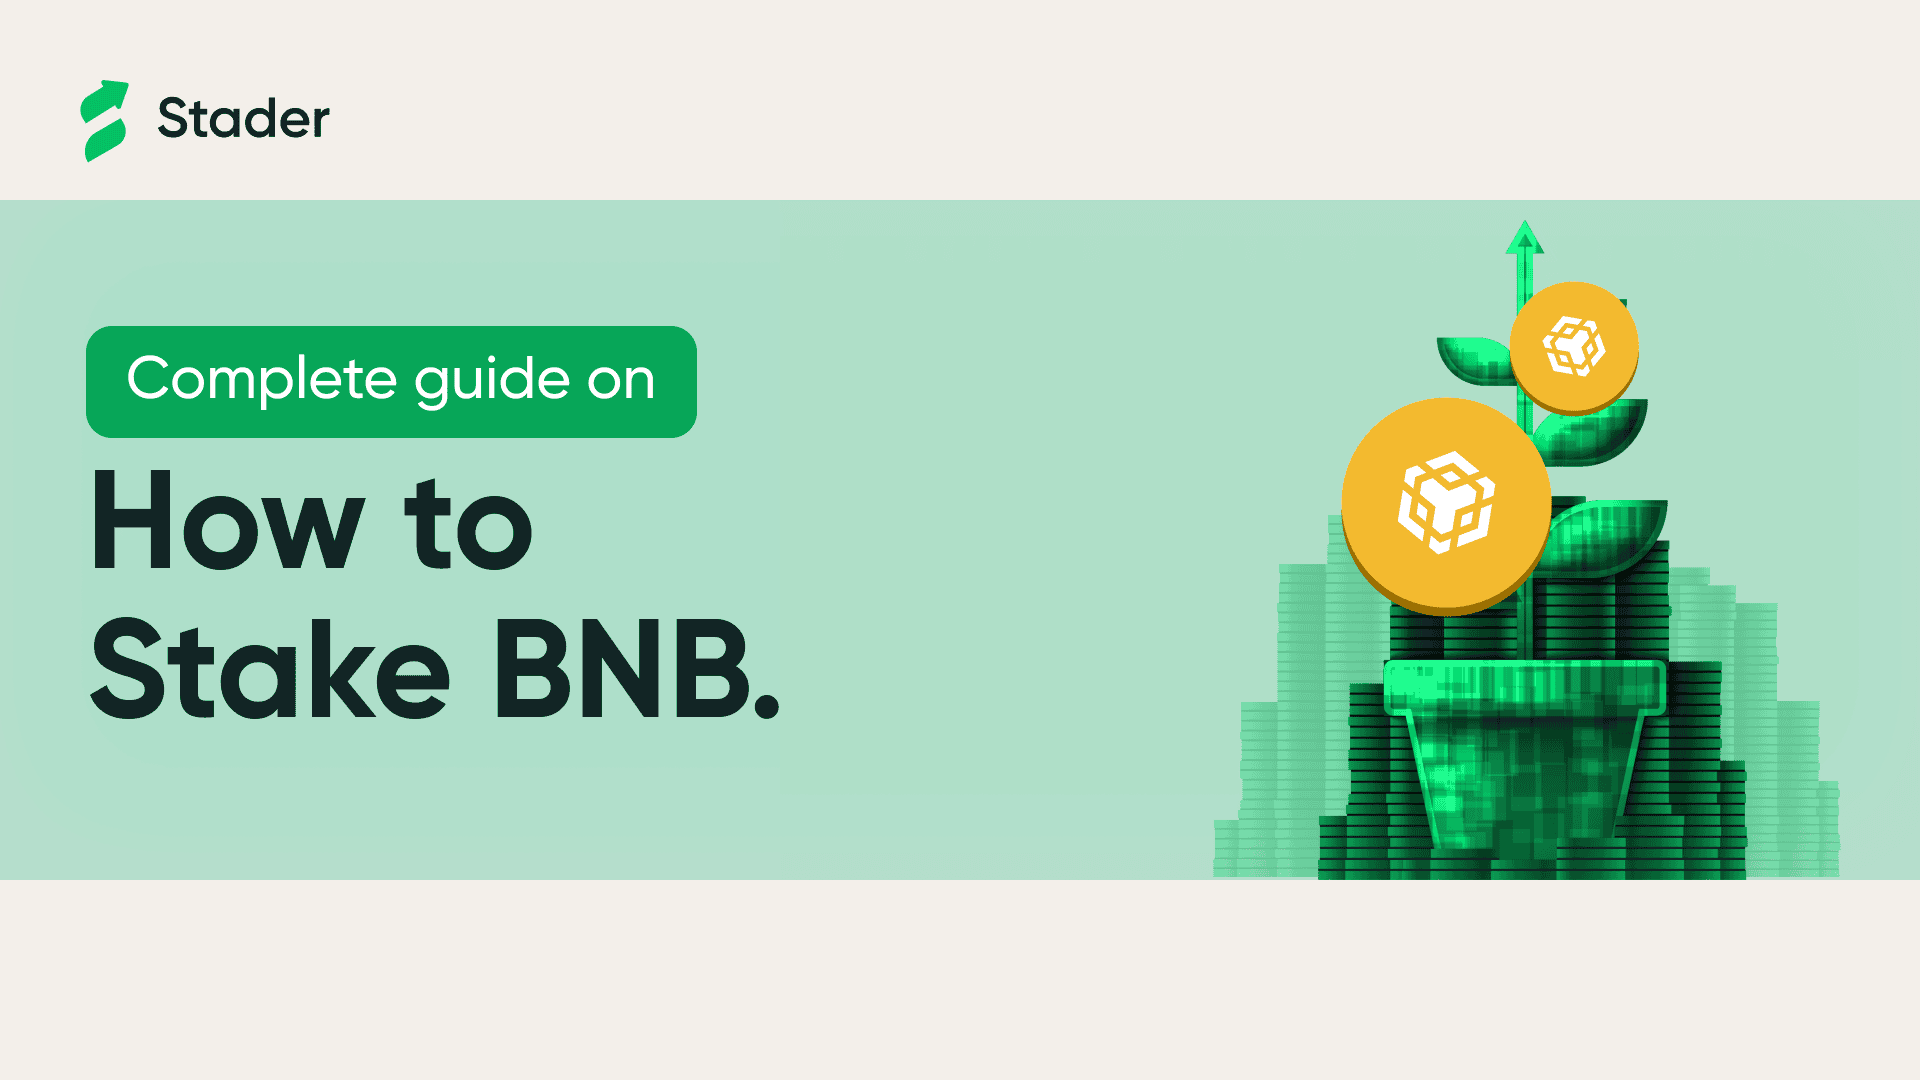 How to Stake BNB banner image